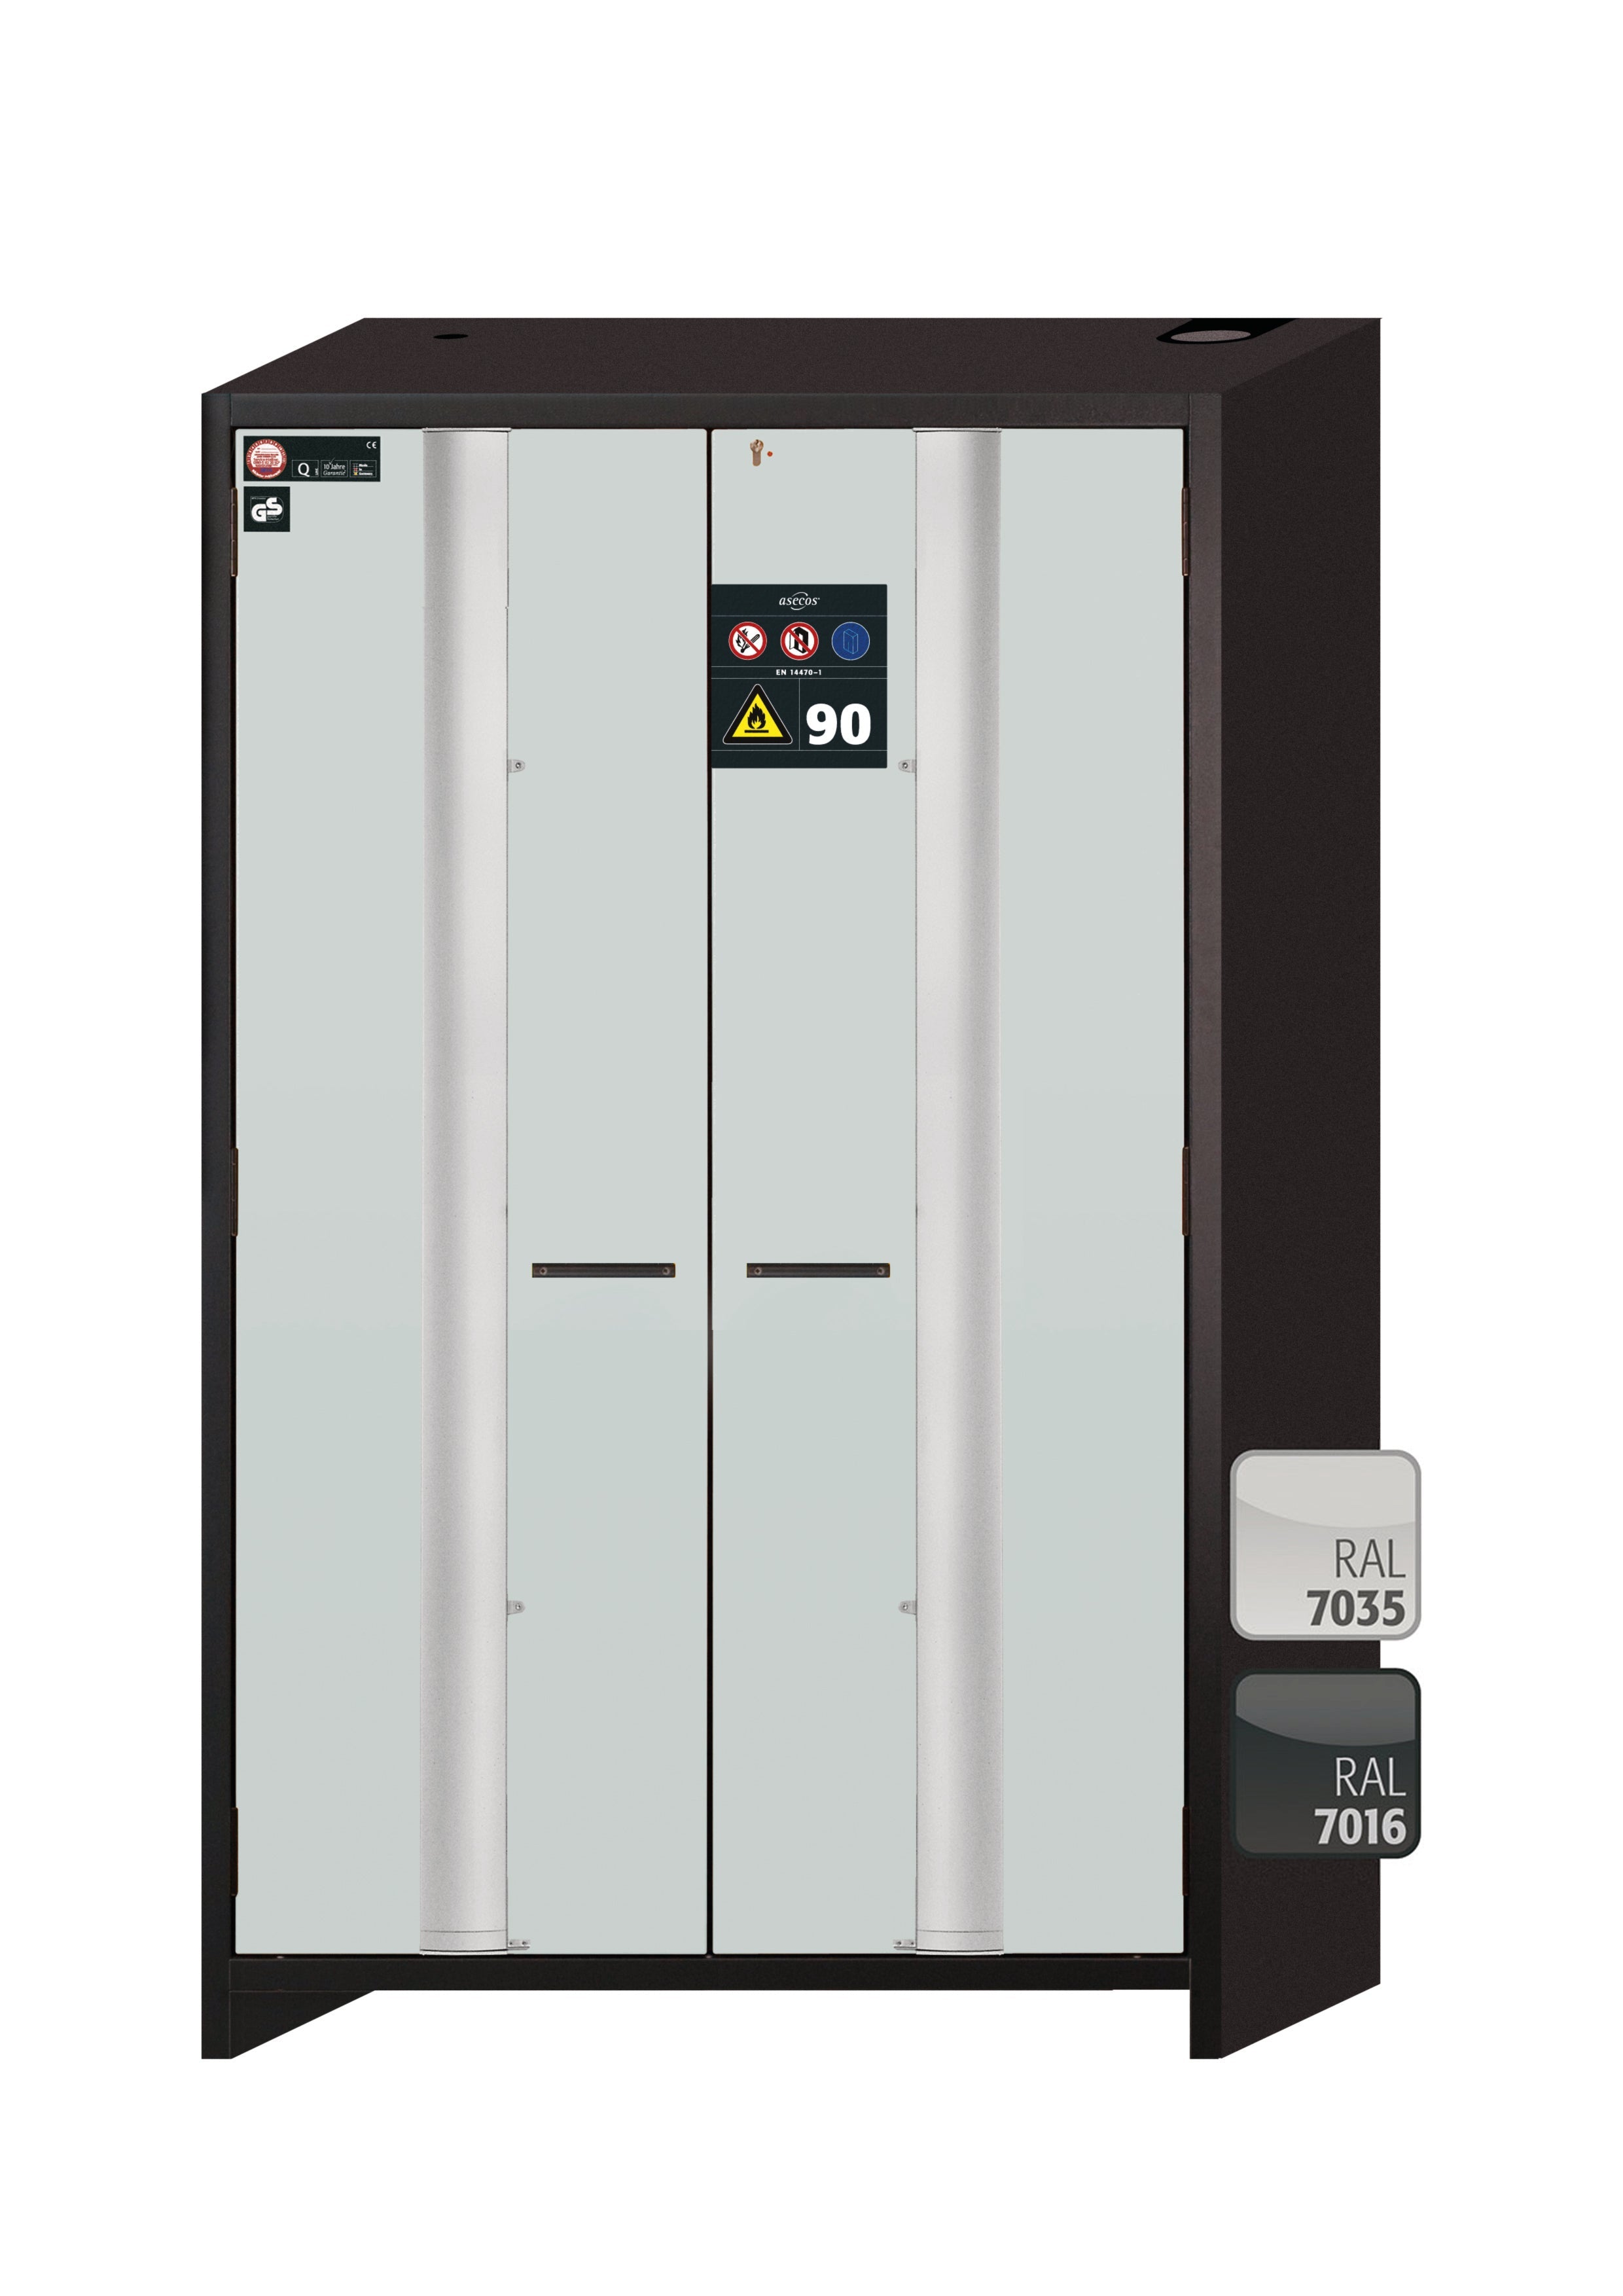 Type 90 safety cabinet Q-PHOENIX-90 model Q90.195.120.FD in light gray RAL 7035 with 2x standard shelves (stainless steel 1.4301)